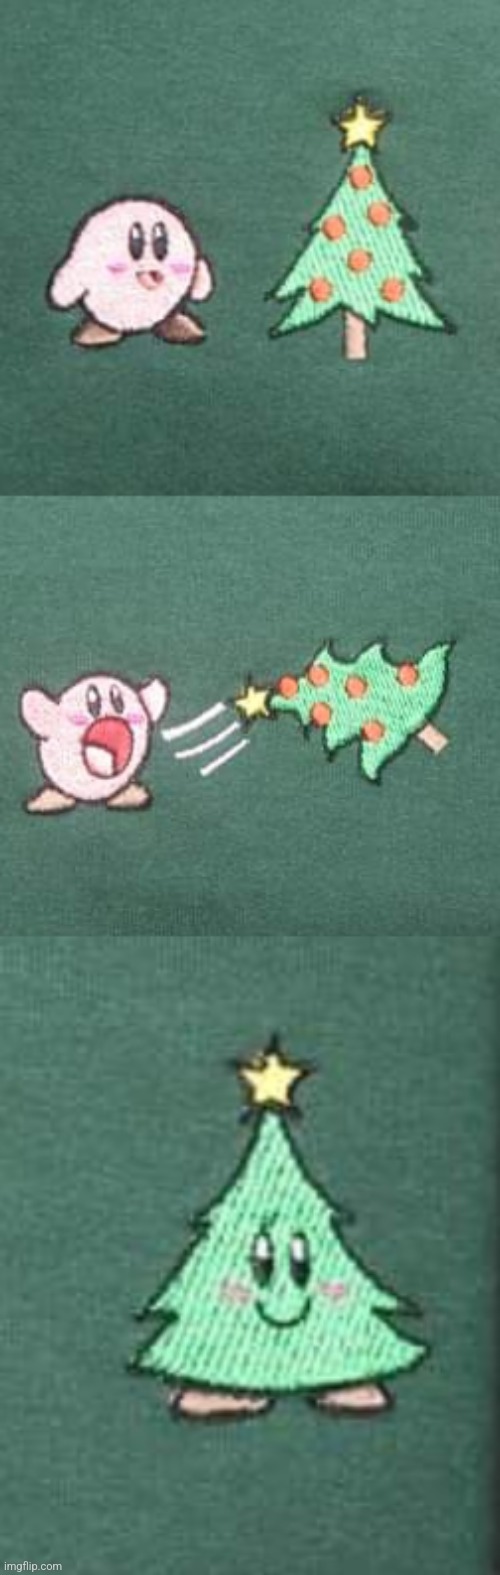 HOW KIRBY STOLE CHRISTMAS | image tagged in kirby,christmas,christmas tree | made w/ Imgflip meme maker